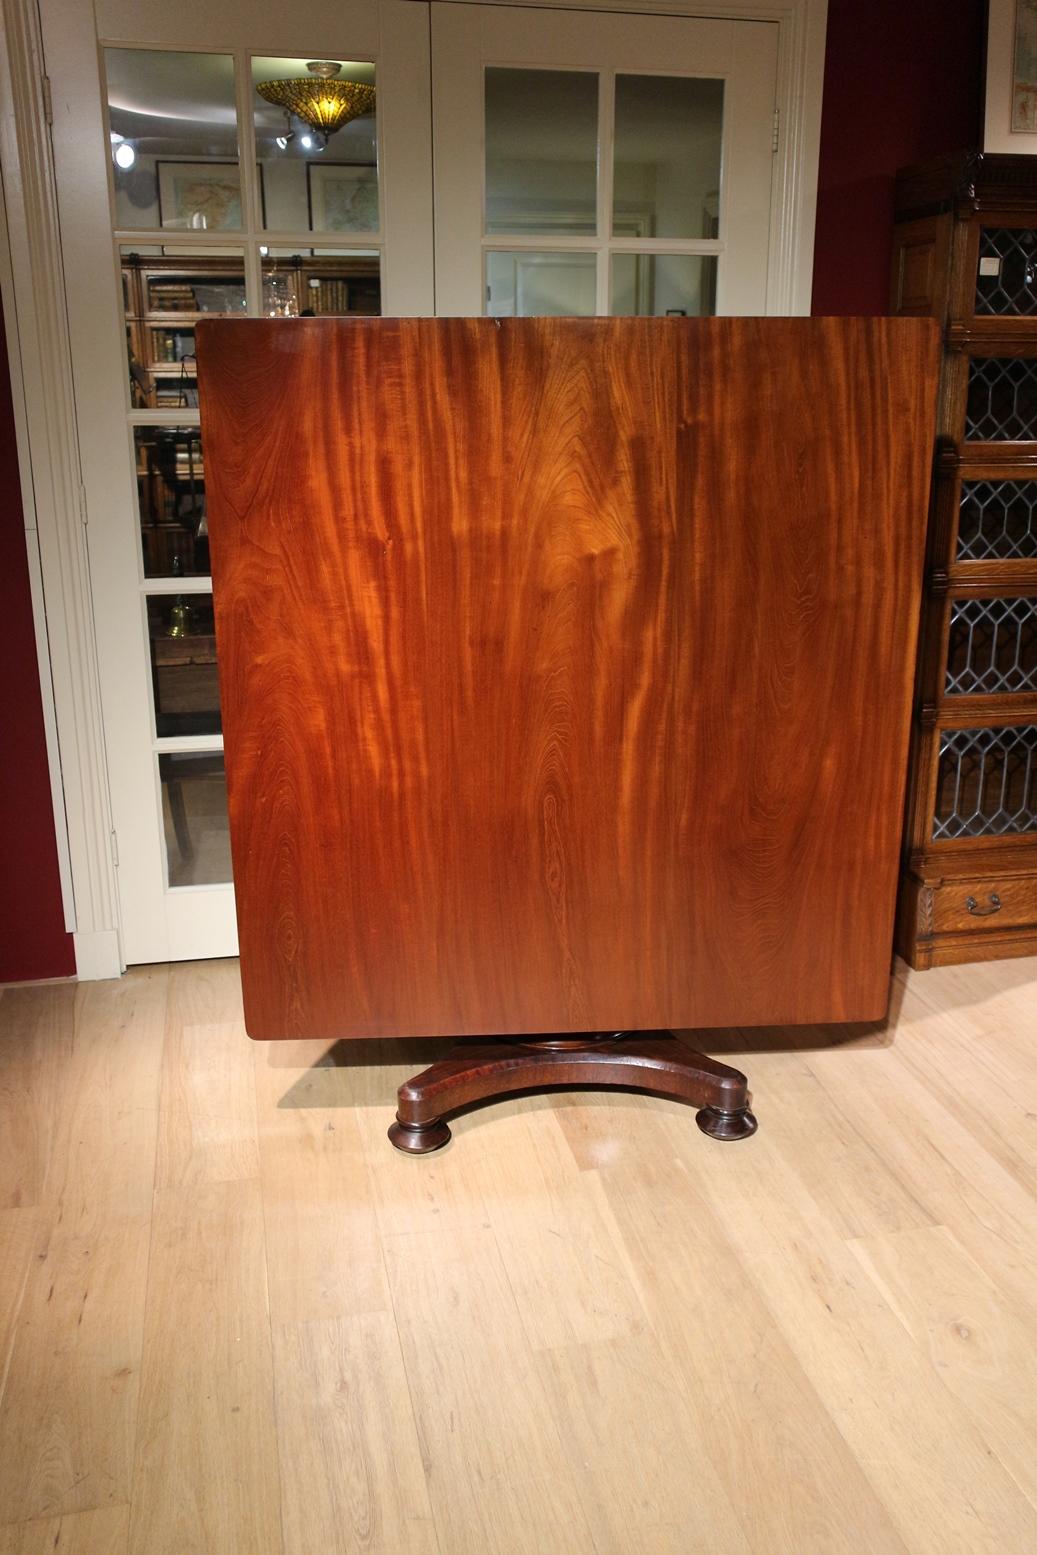 A fine quality William IV tilt-top breakfast, or supper, dining table. Made from a fine grade of solid mahogany. It has a great depth of color and rich patina. The central column base spreads into a quadraform base with round feet that terminate in